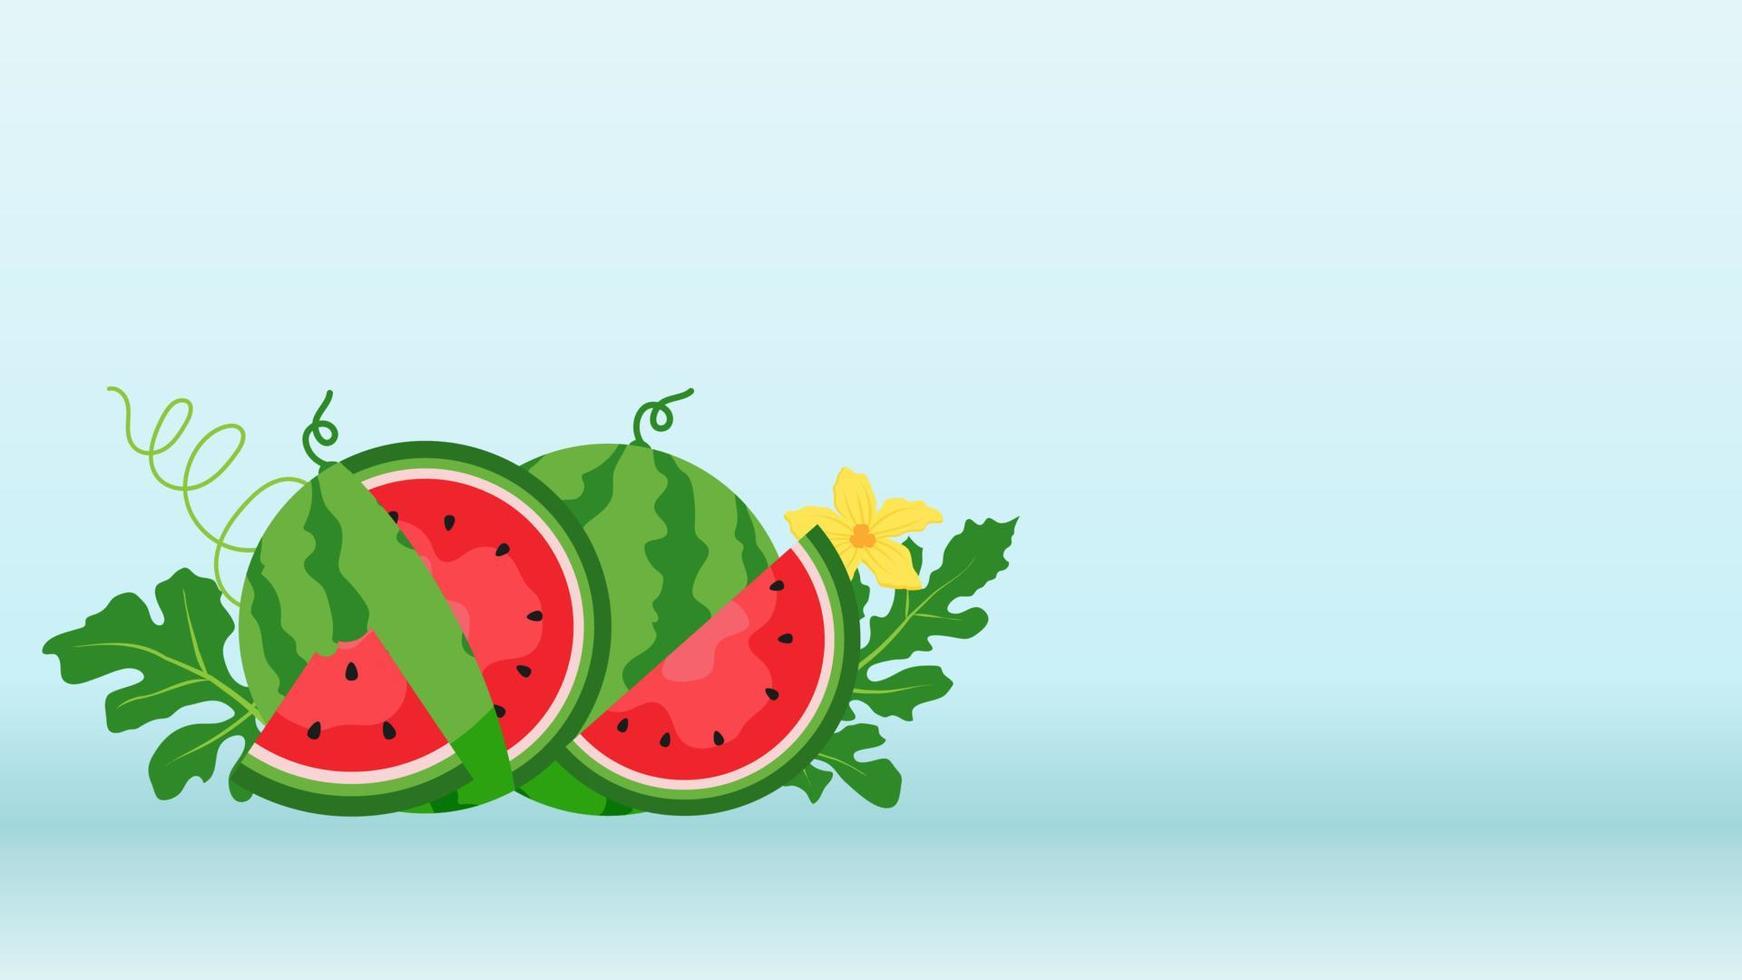 Watermelon and juicy slices vector, flat design of green leaves and flower and watermelon juice illustration, Fresh and juicy fruit concept of summer food. vector